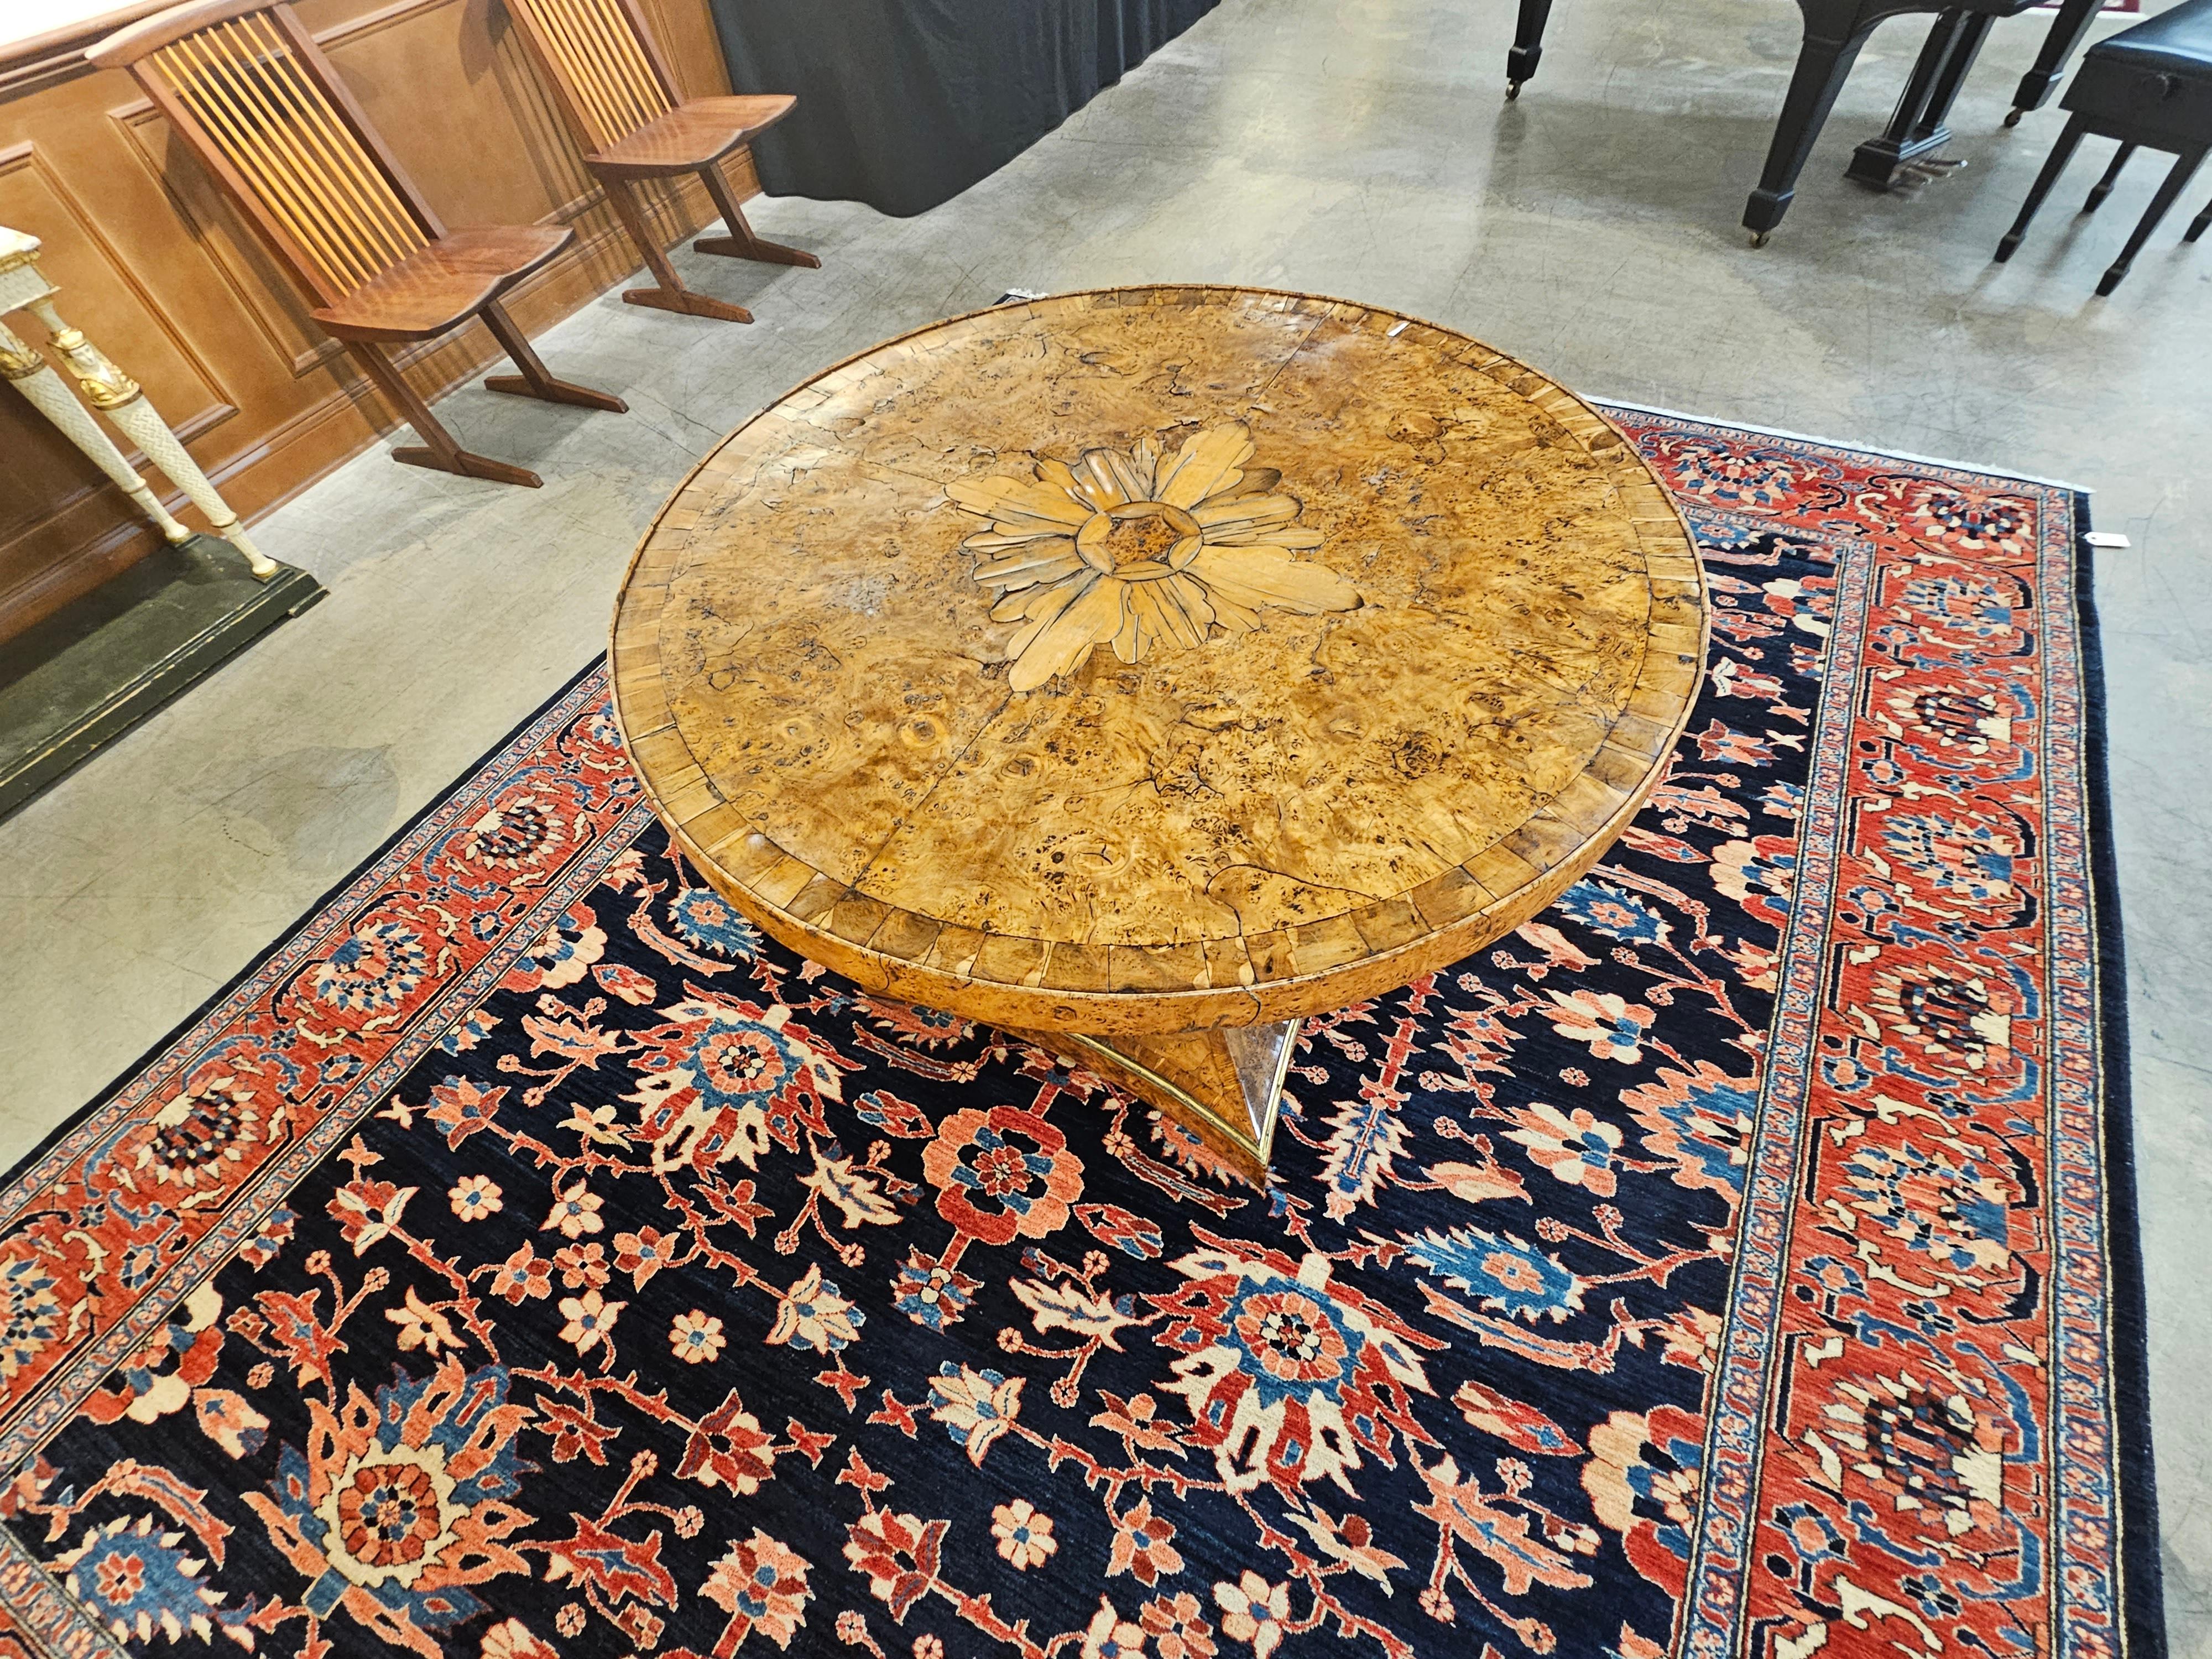 1820s Biedermeier Brass Mounted Carelian Birch and Marquetry Center Table For Sale 3